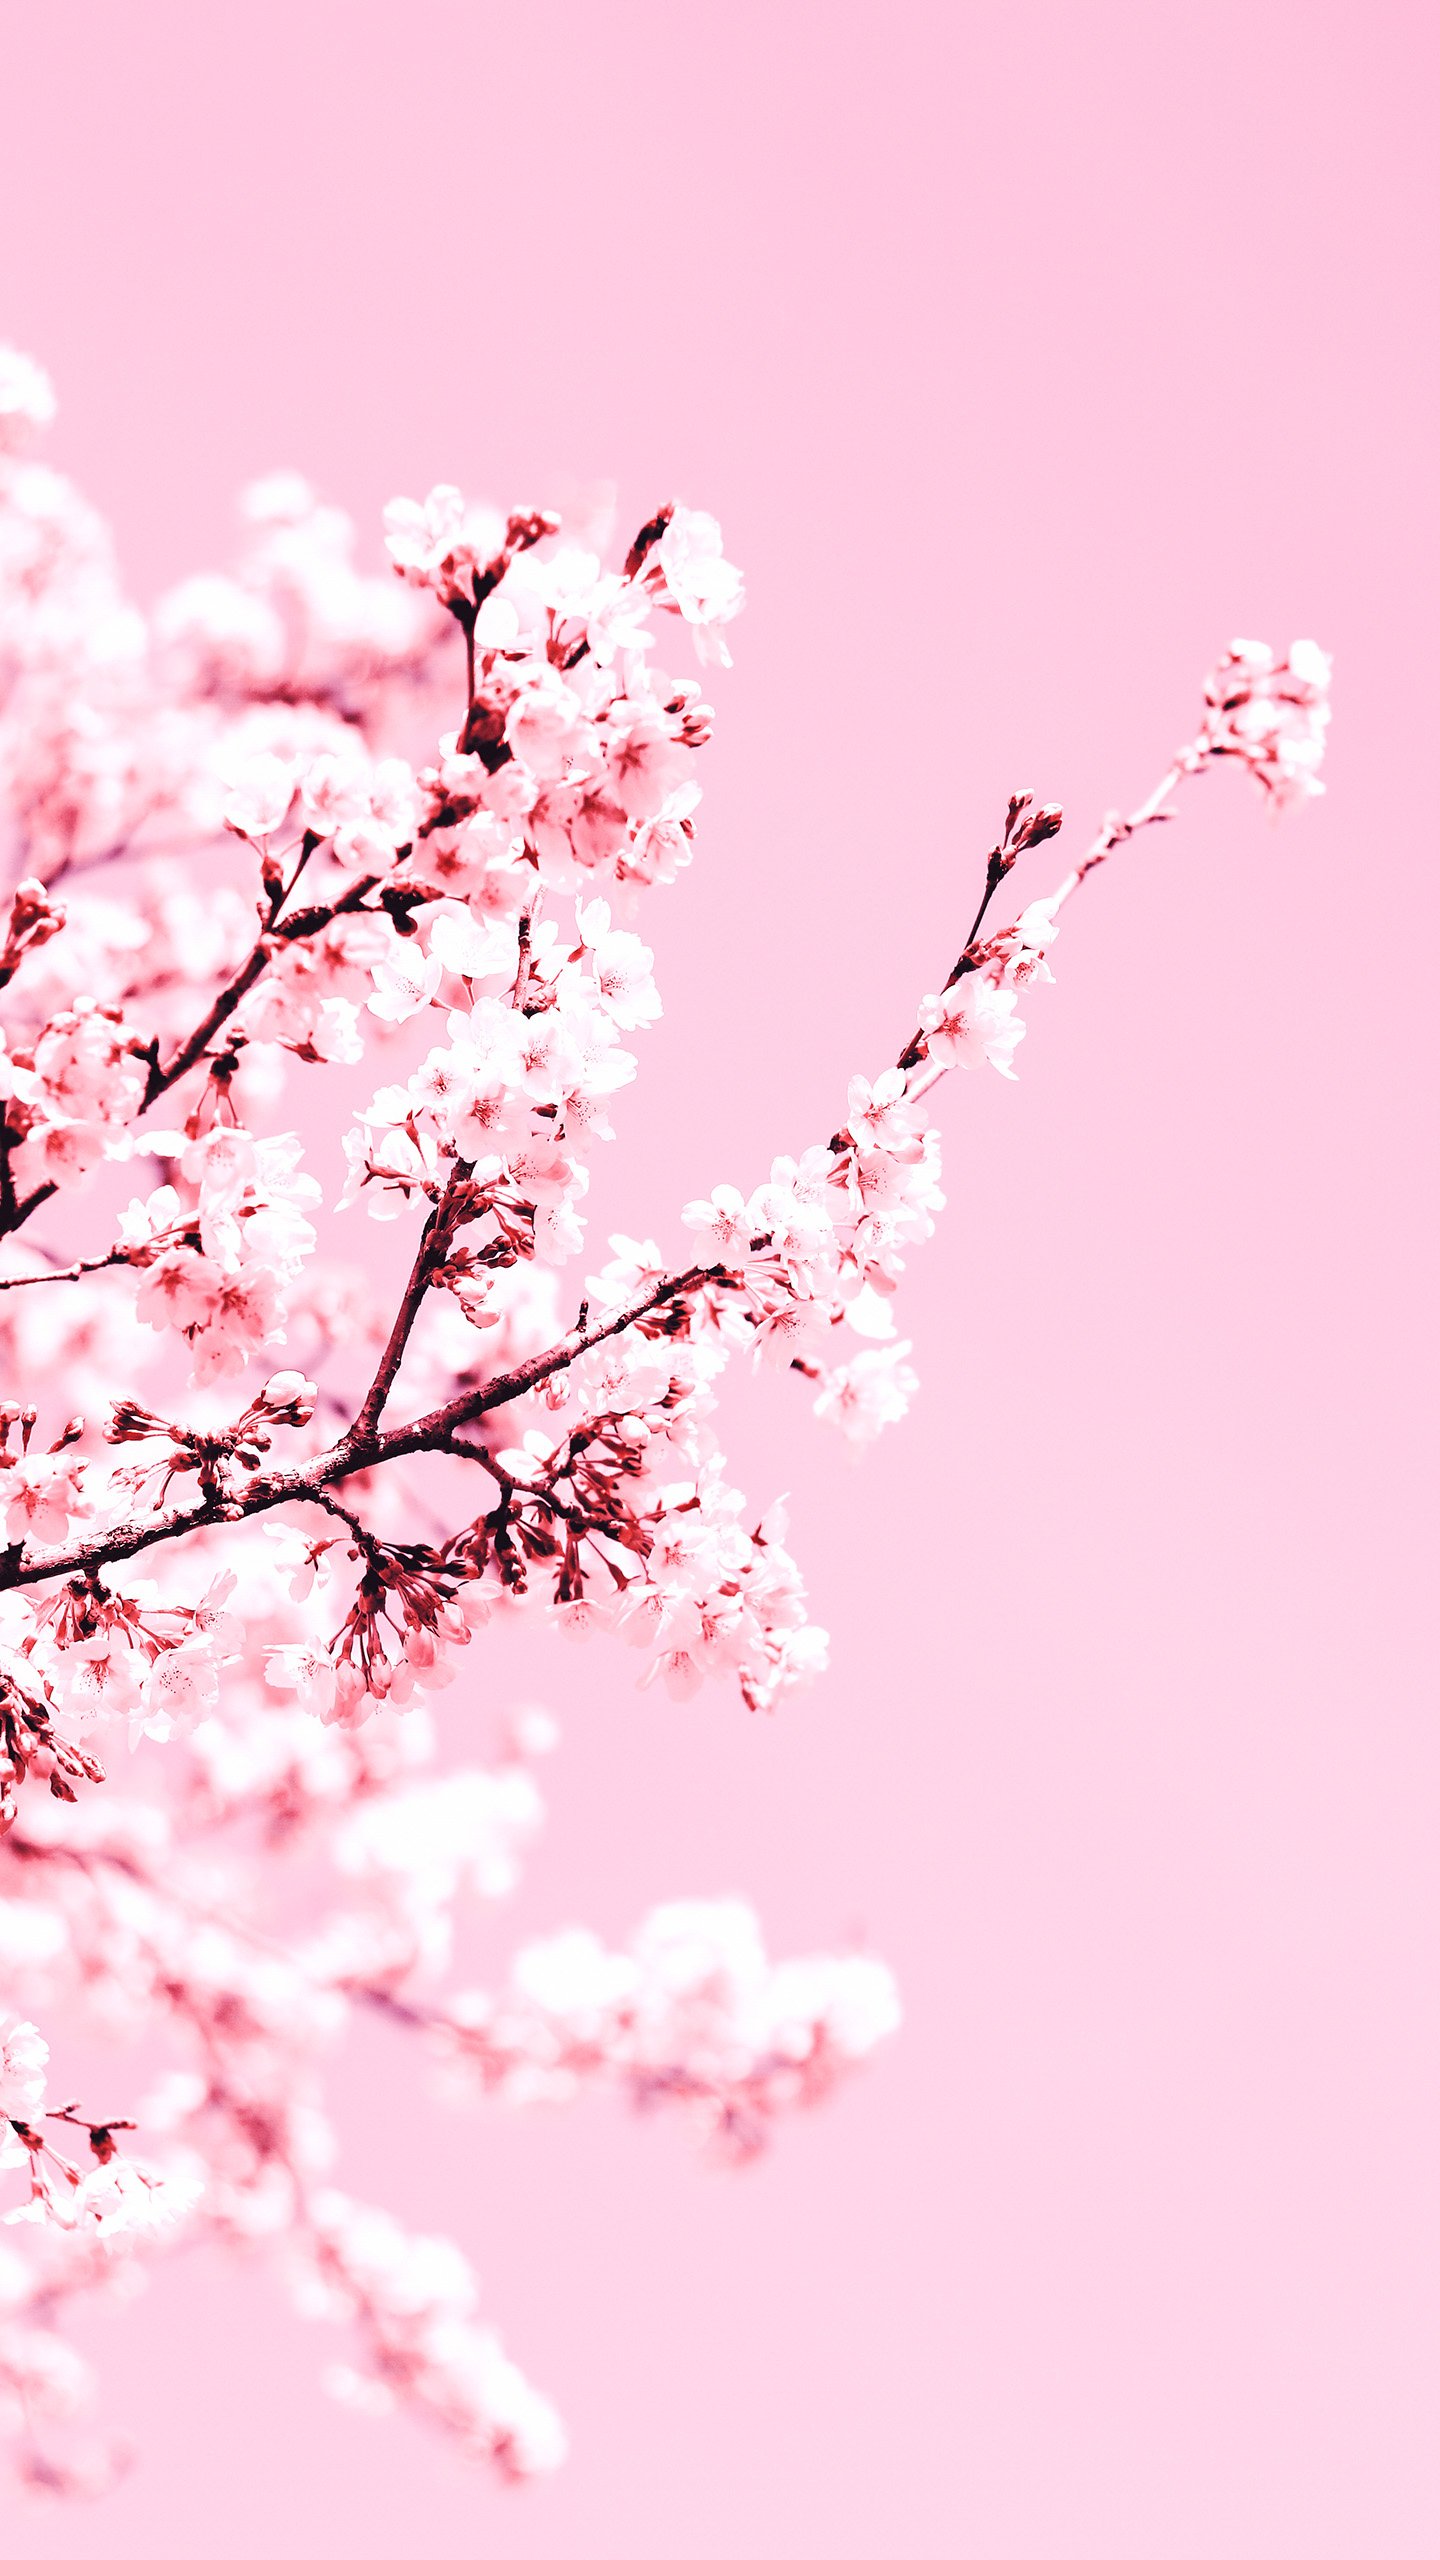 550 Cherry Blossom Pictures  Download Free Images on Unsplash